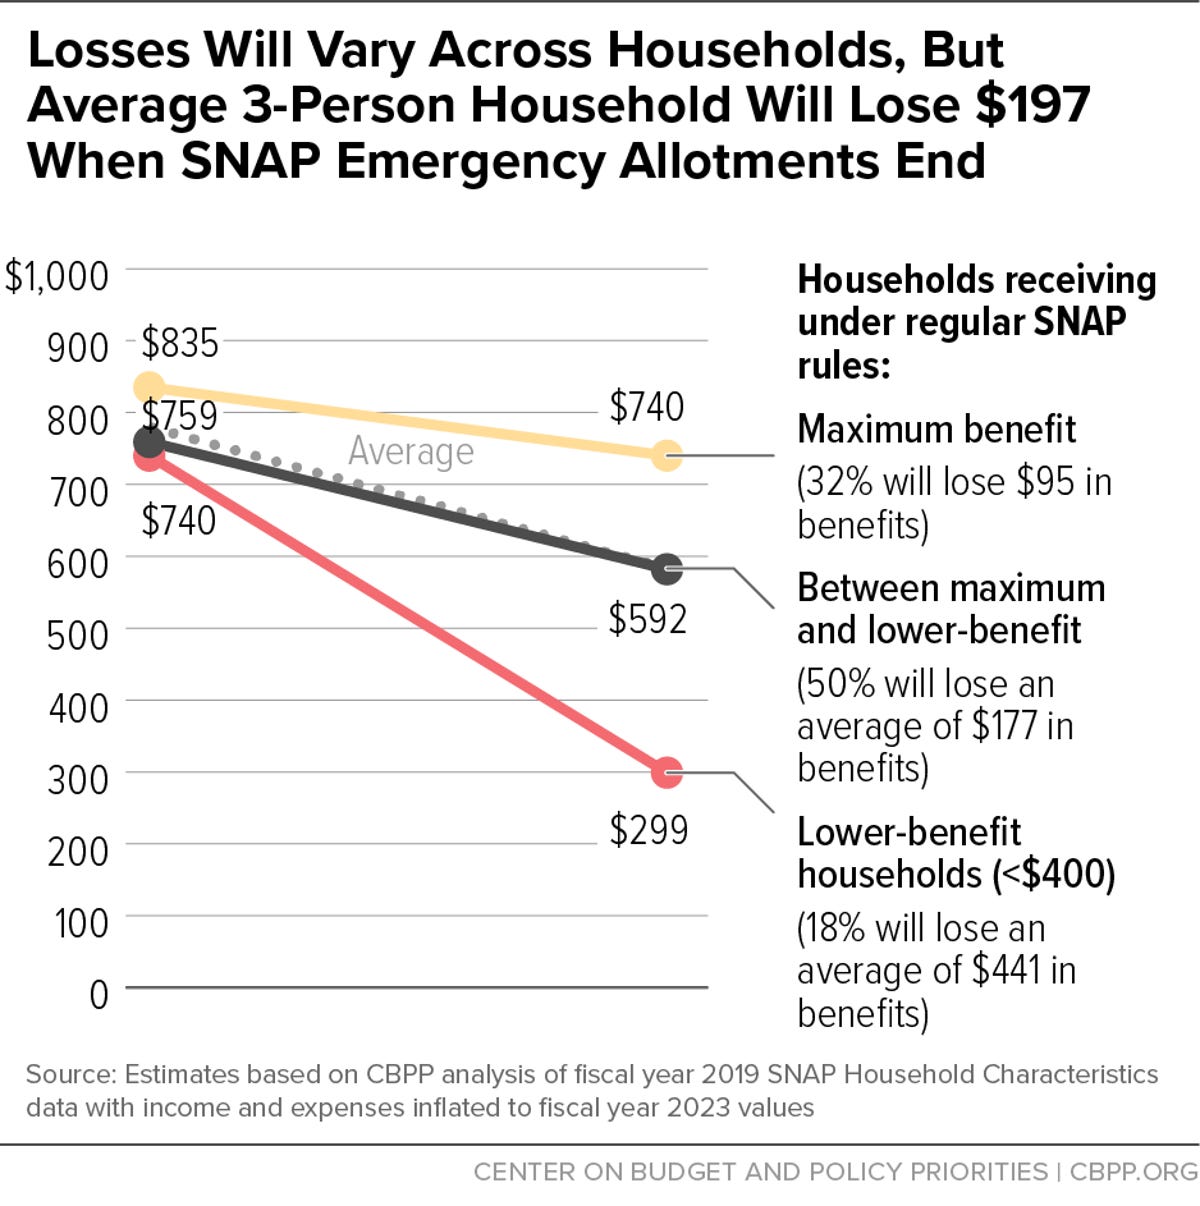 three-person household will lose $197 in SNAP benefits